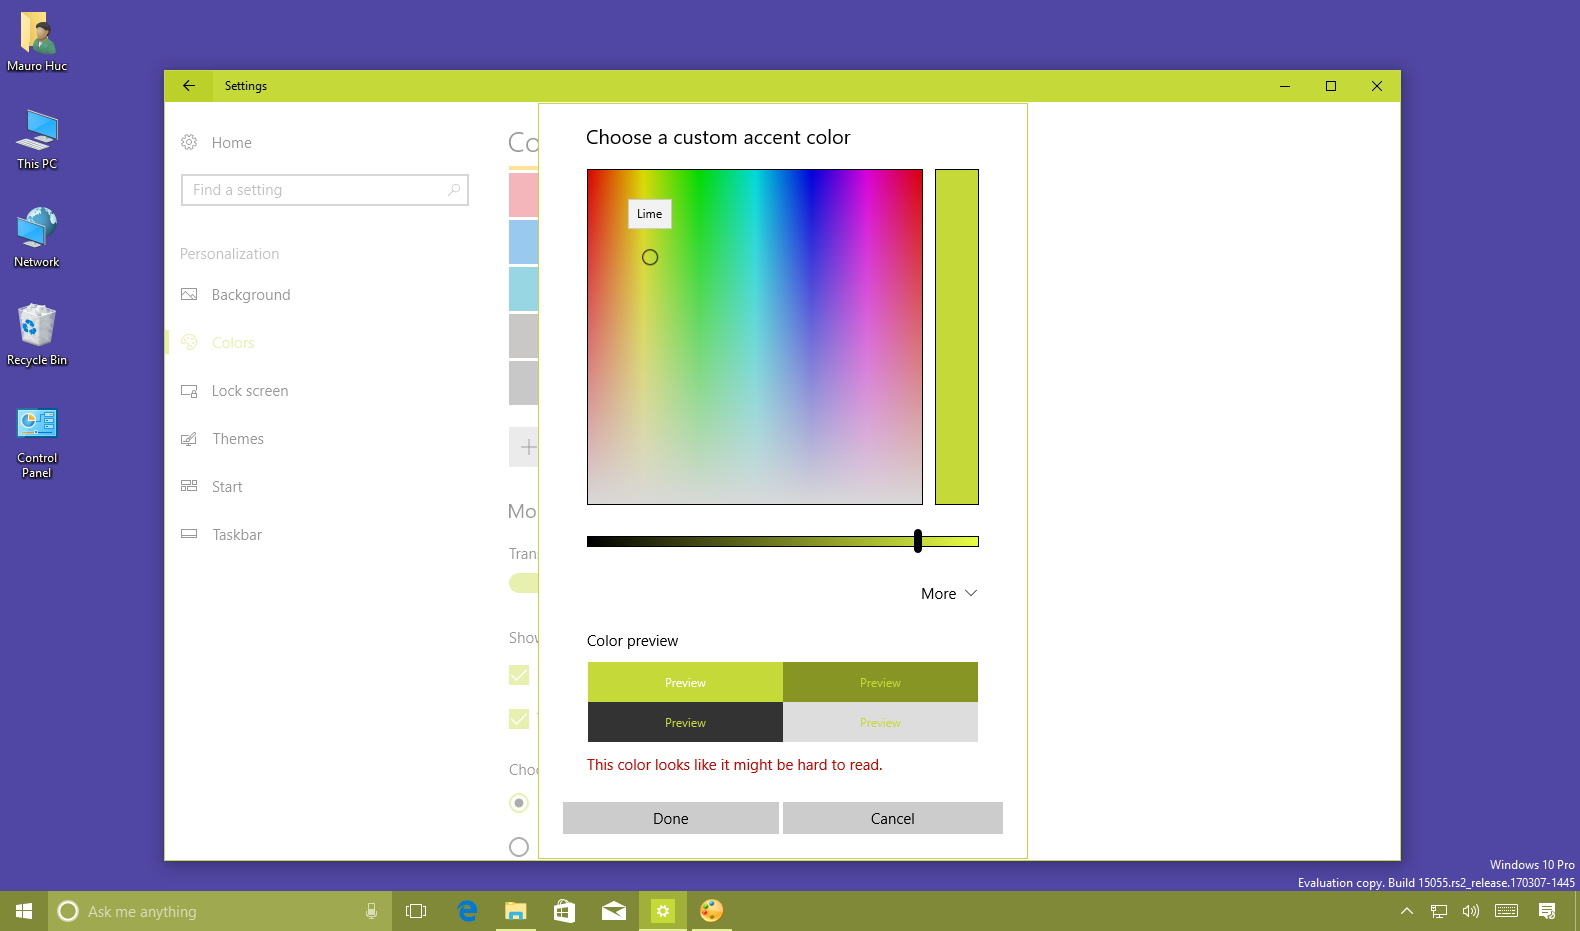 How To Choose A Custom Accent Color On Windows 10 • Pureinfotech